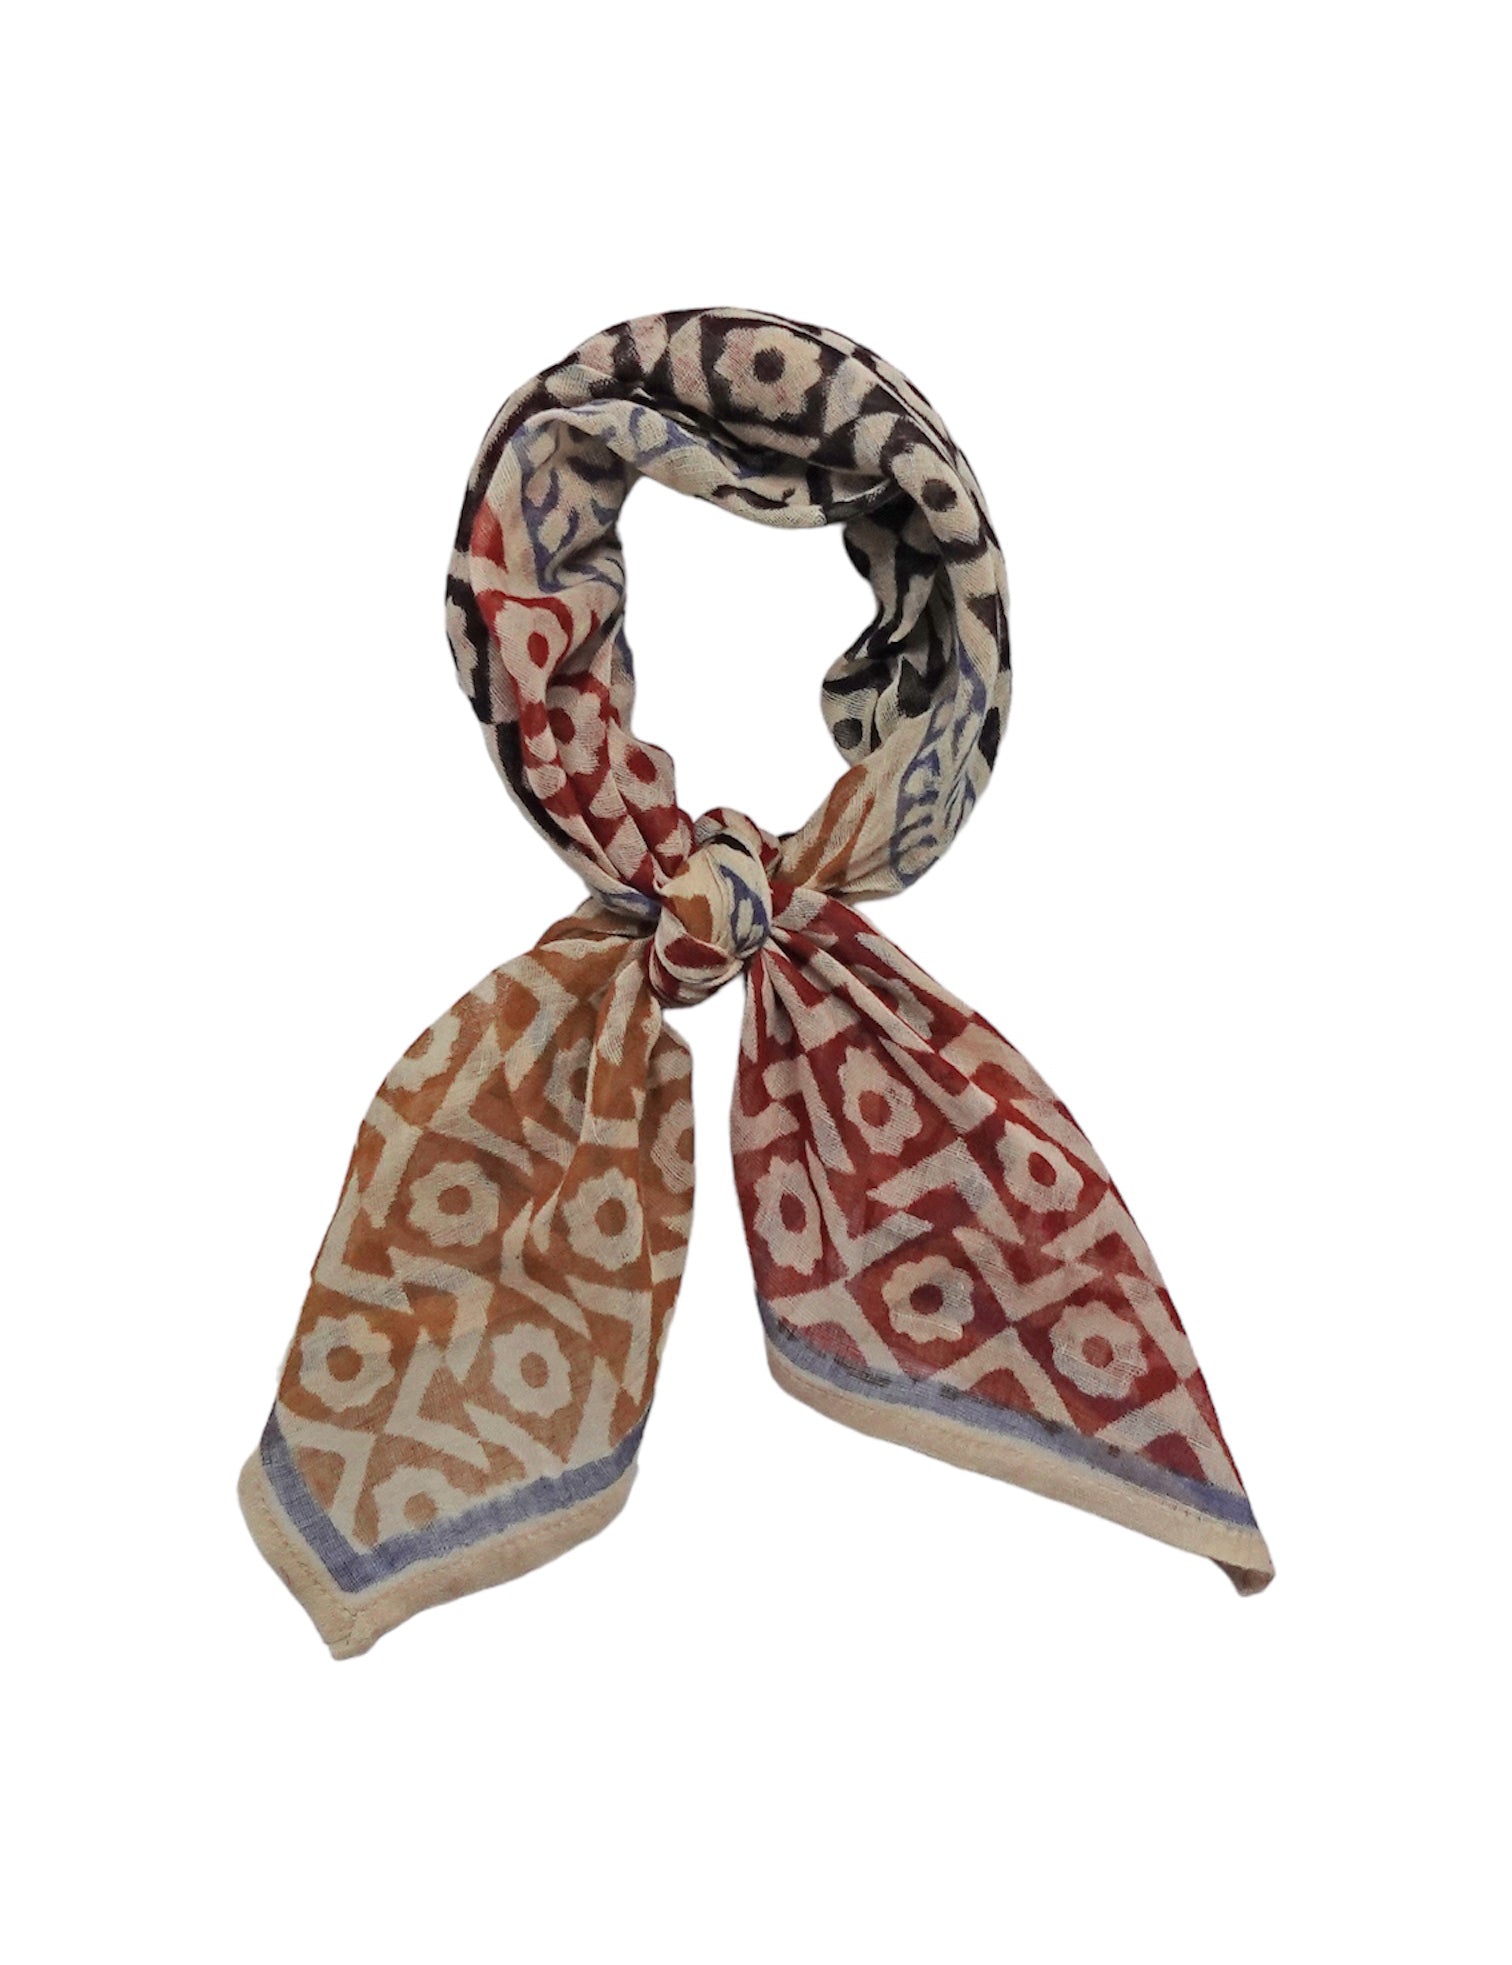 Block printed geometric and floral print Roma bandana, tied flat against a white background